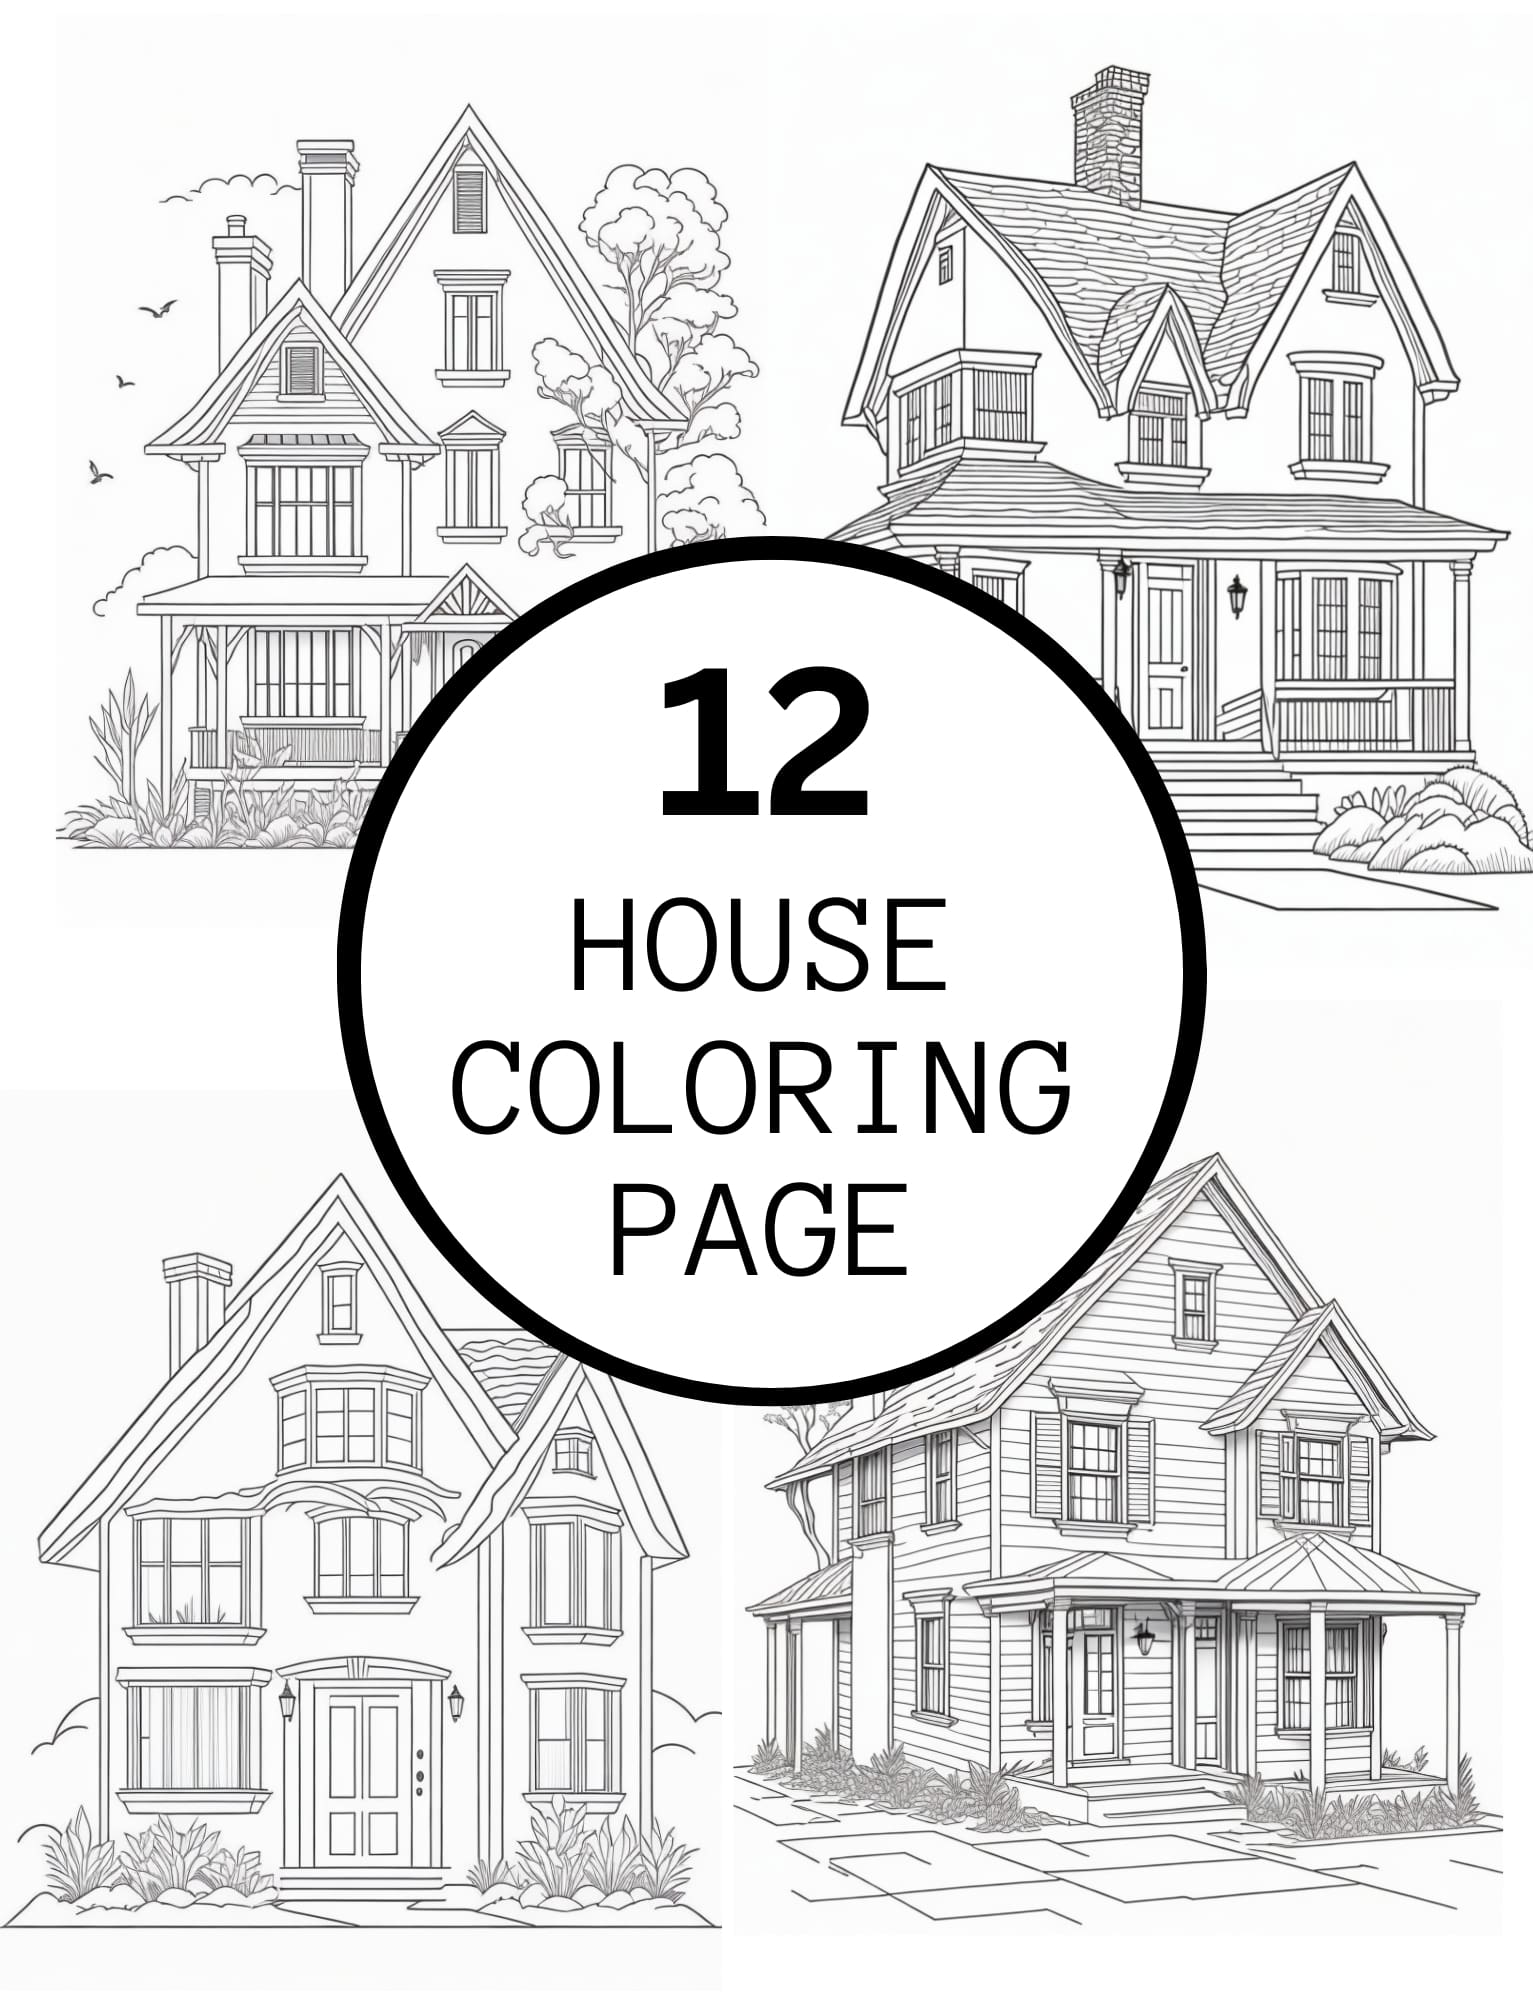 Realistic house coloring pages for kids and adults made by teachers